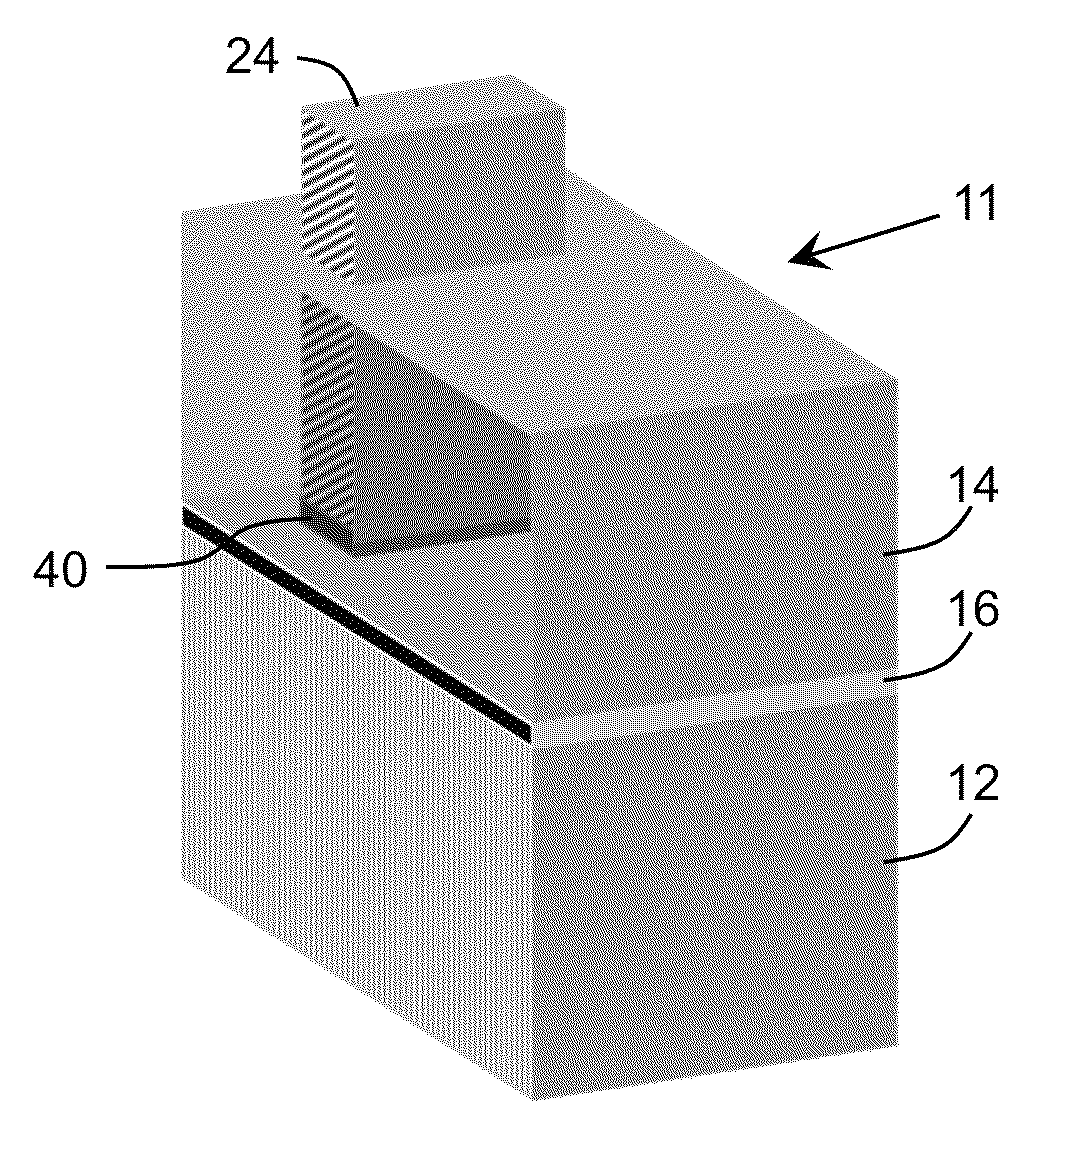 Ohmic contact to semiconductor layer